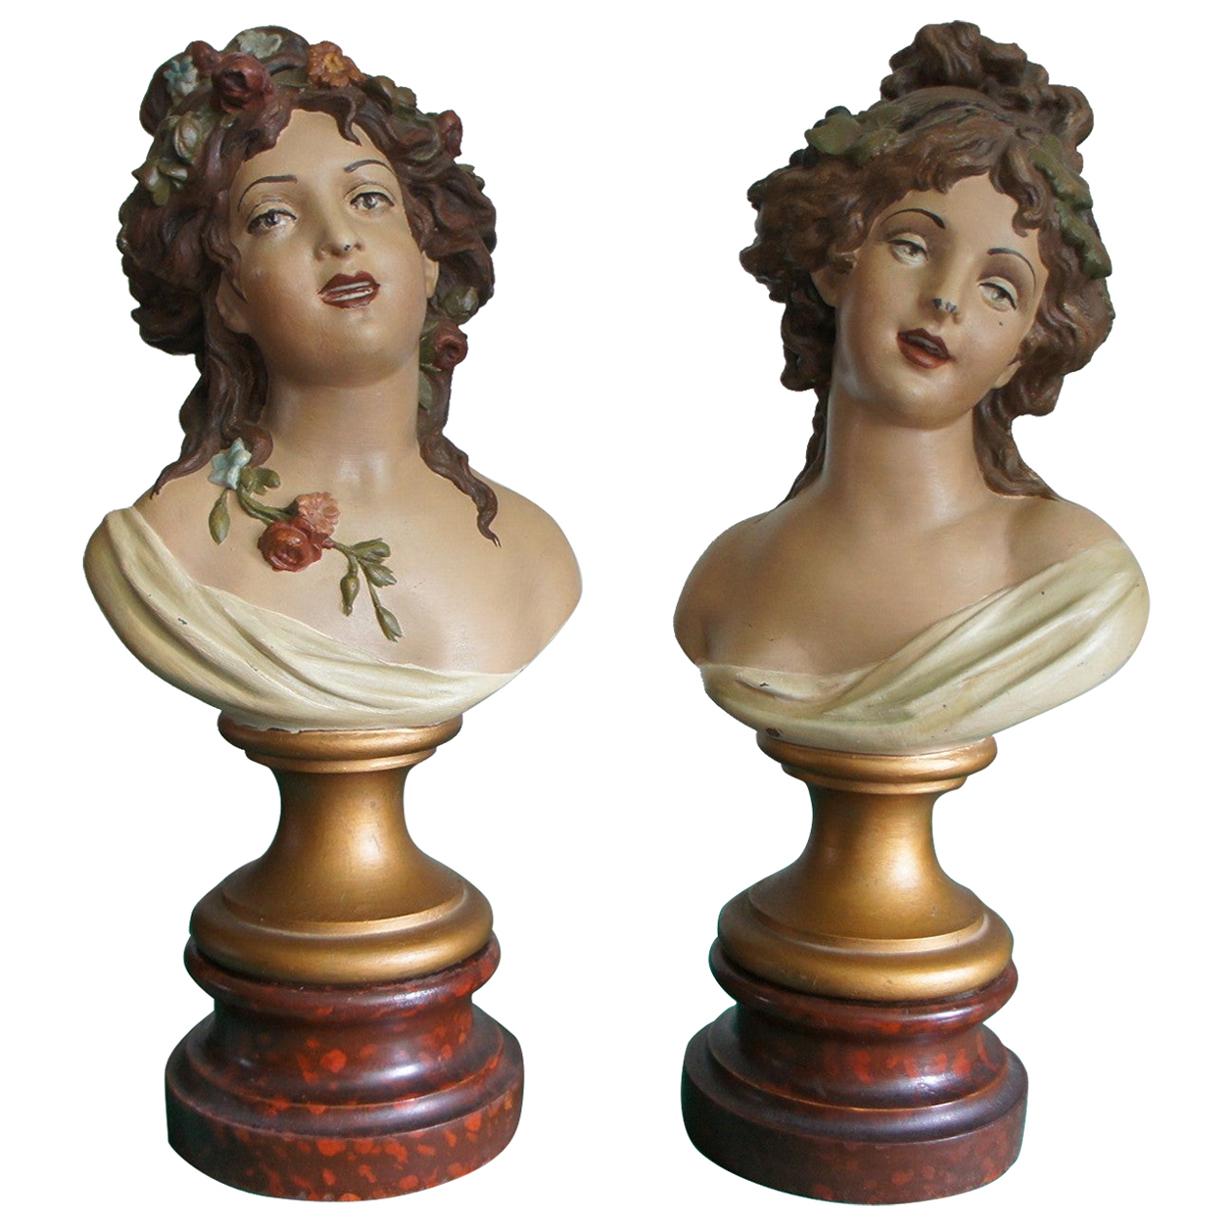 Antique Hand Painted Pair of Lady Bust Sculptures by Clodion Aka Claude Michel